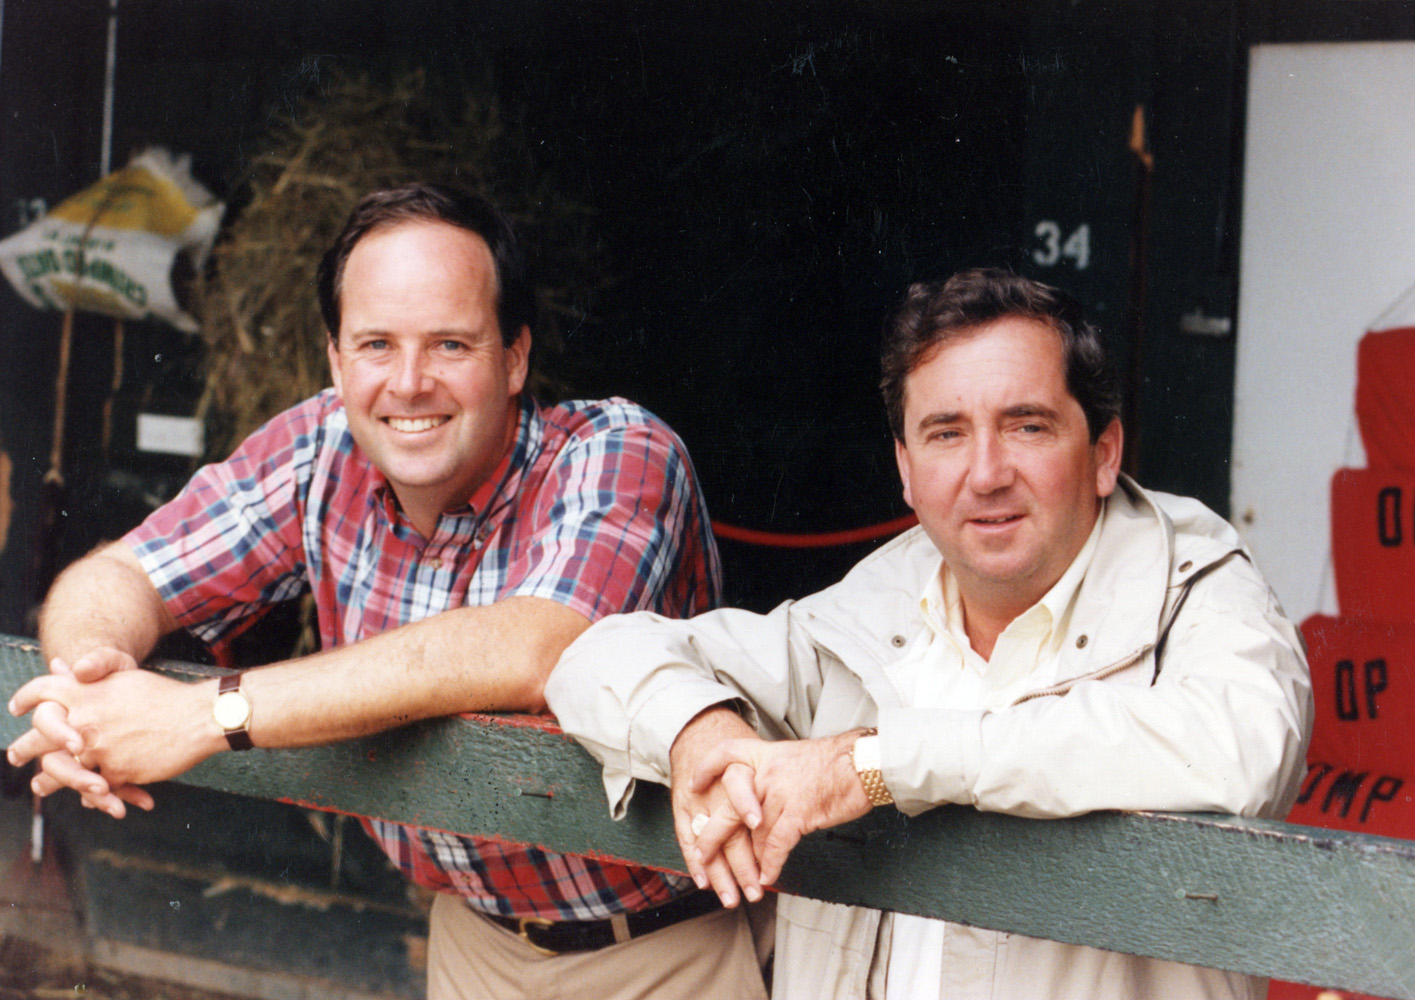 "Shug" McGaughey (on right) at Saratoga, August 1990 (Mike Pender/Museum Collection)